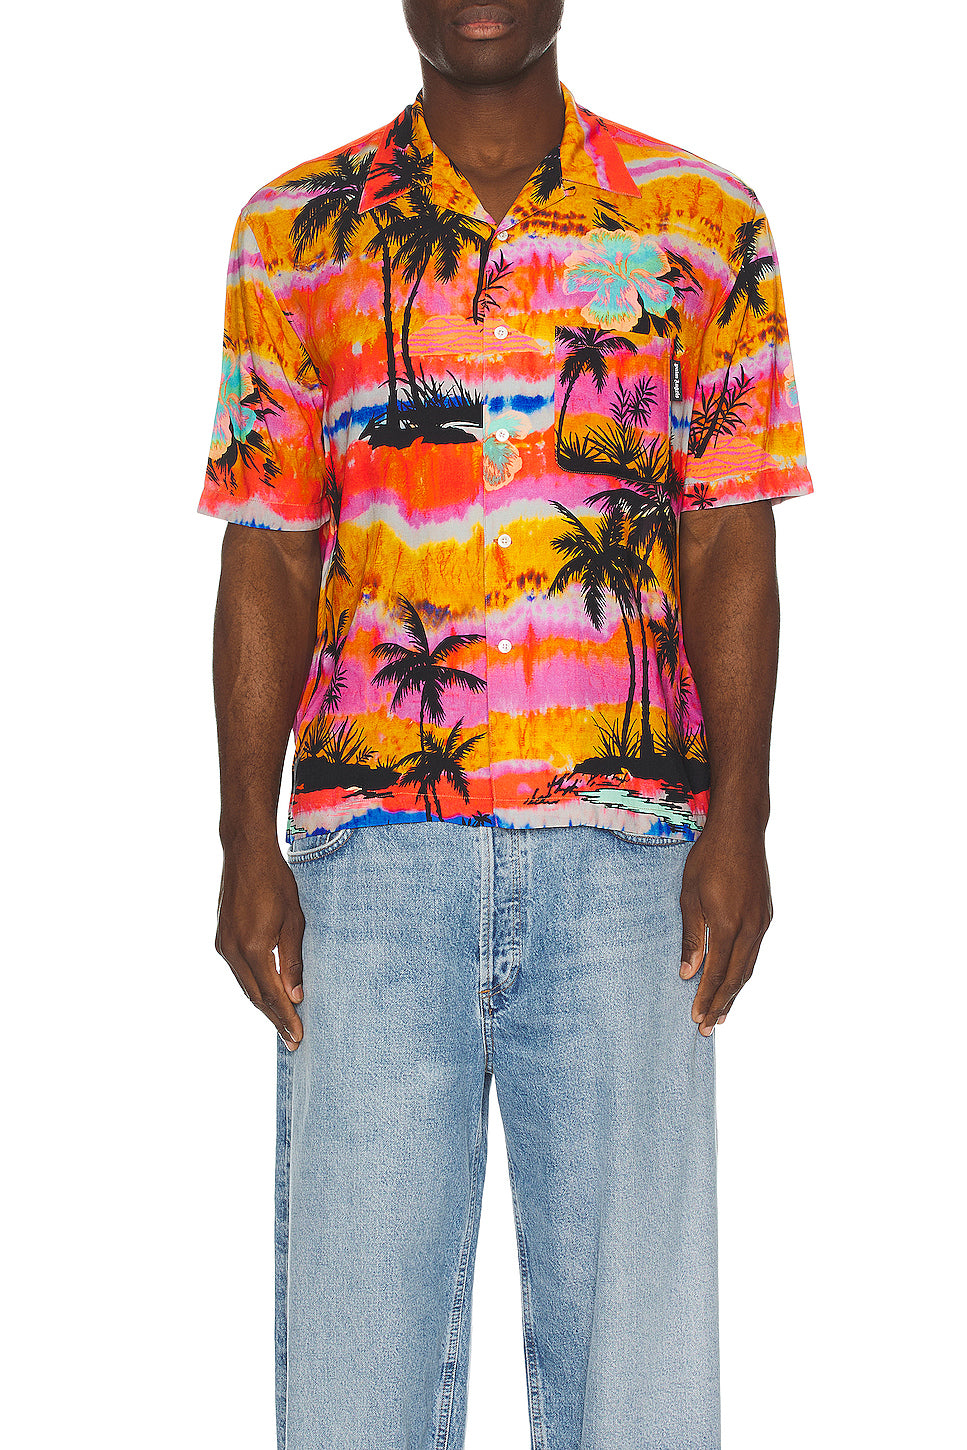 Psychedelic Palms Bowling Shirt